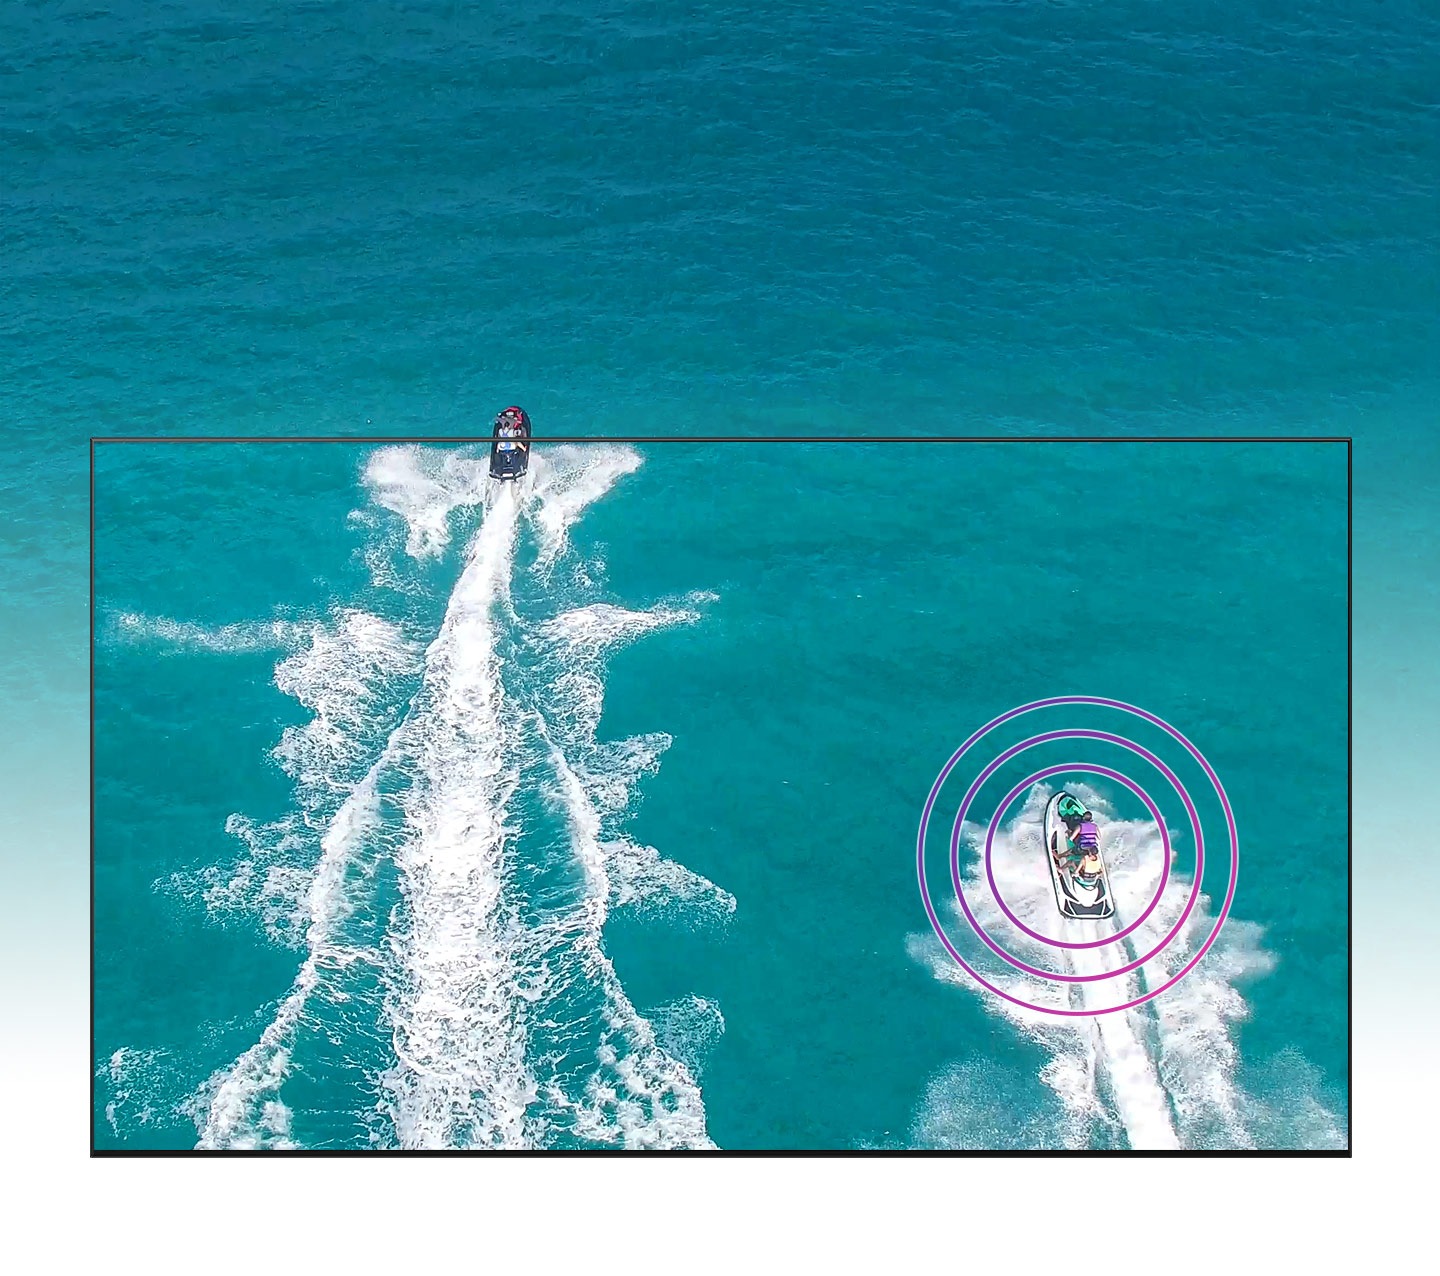 From a bird's eye view, two boats are moving from bottom to top. The boat on the left is already leaving the TV screen, and the boat on the right on the TV screen is marked with a sound.